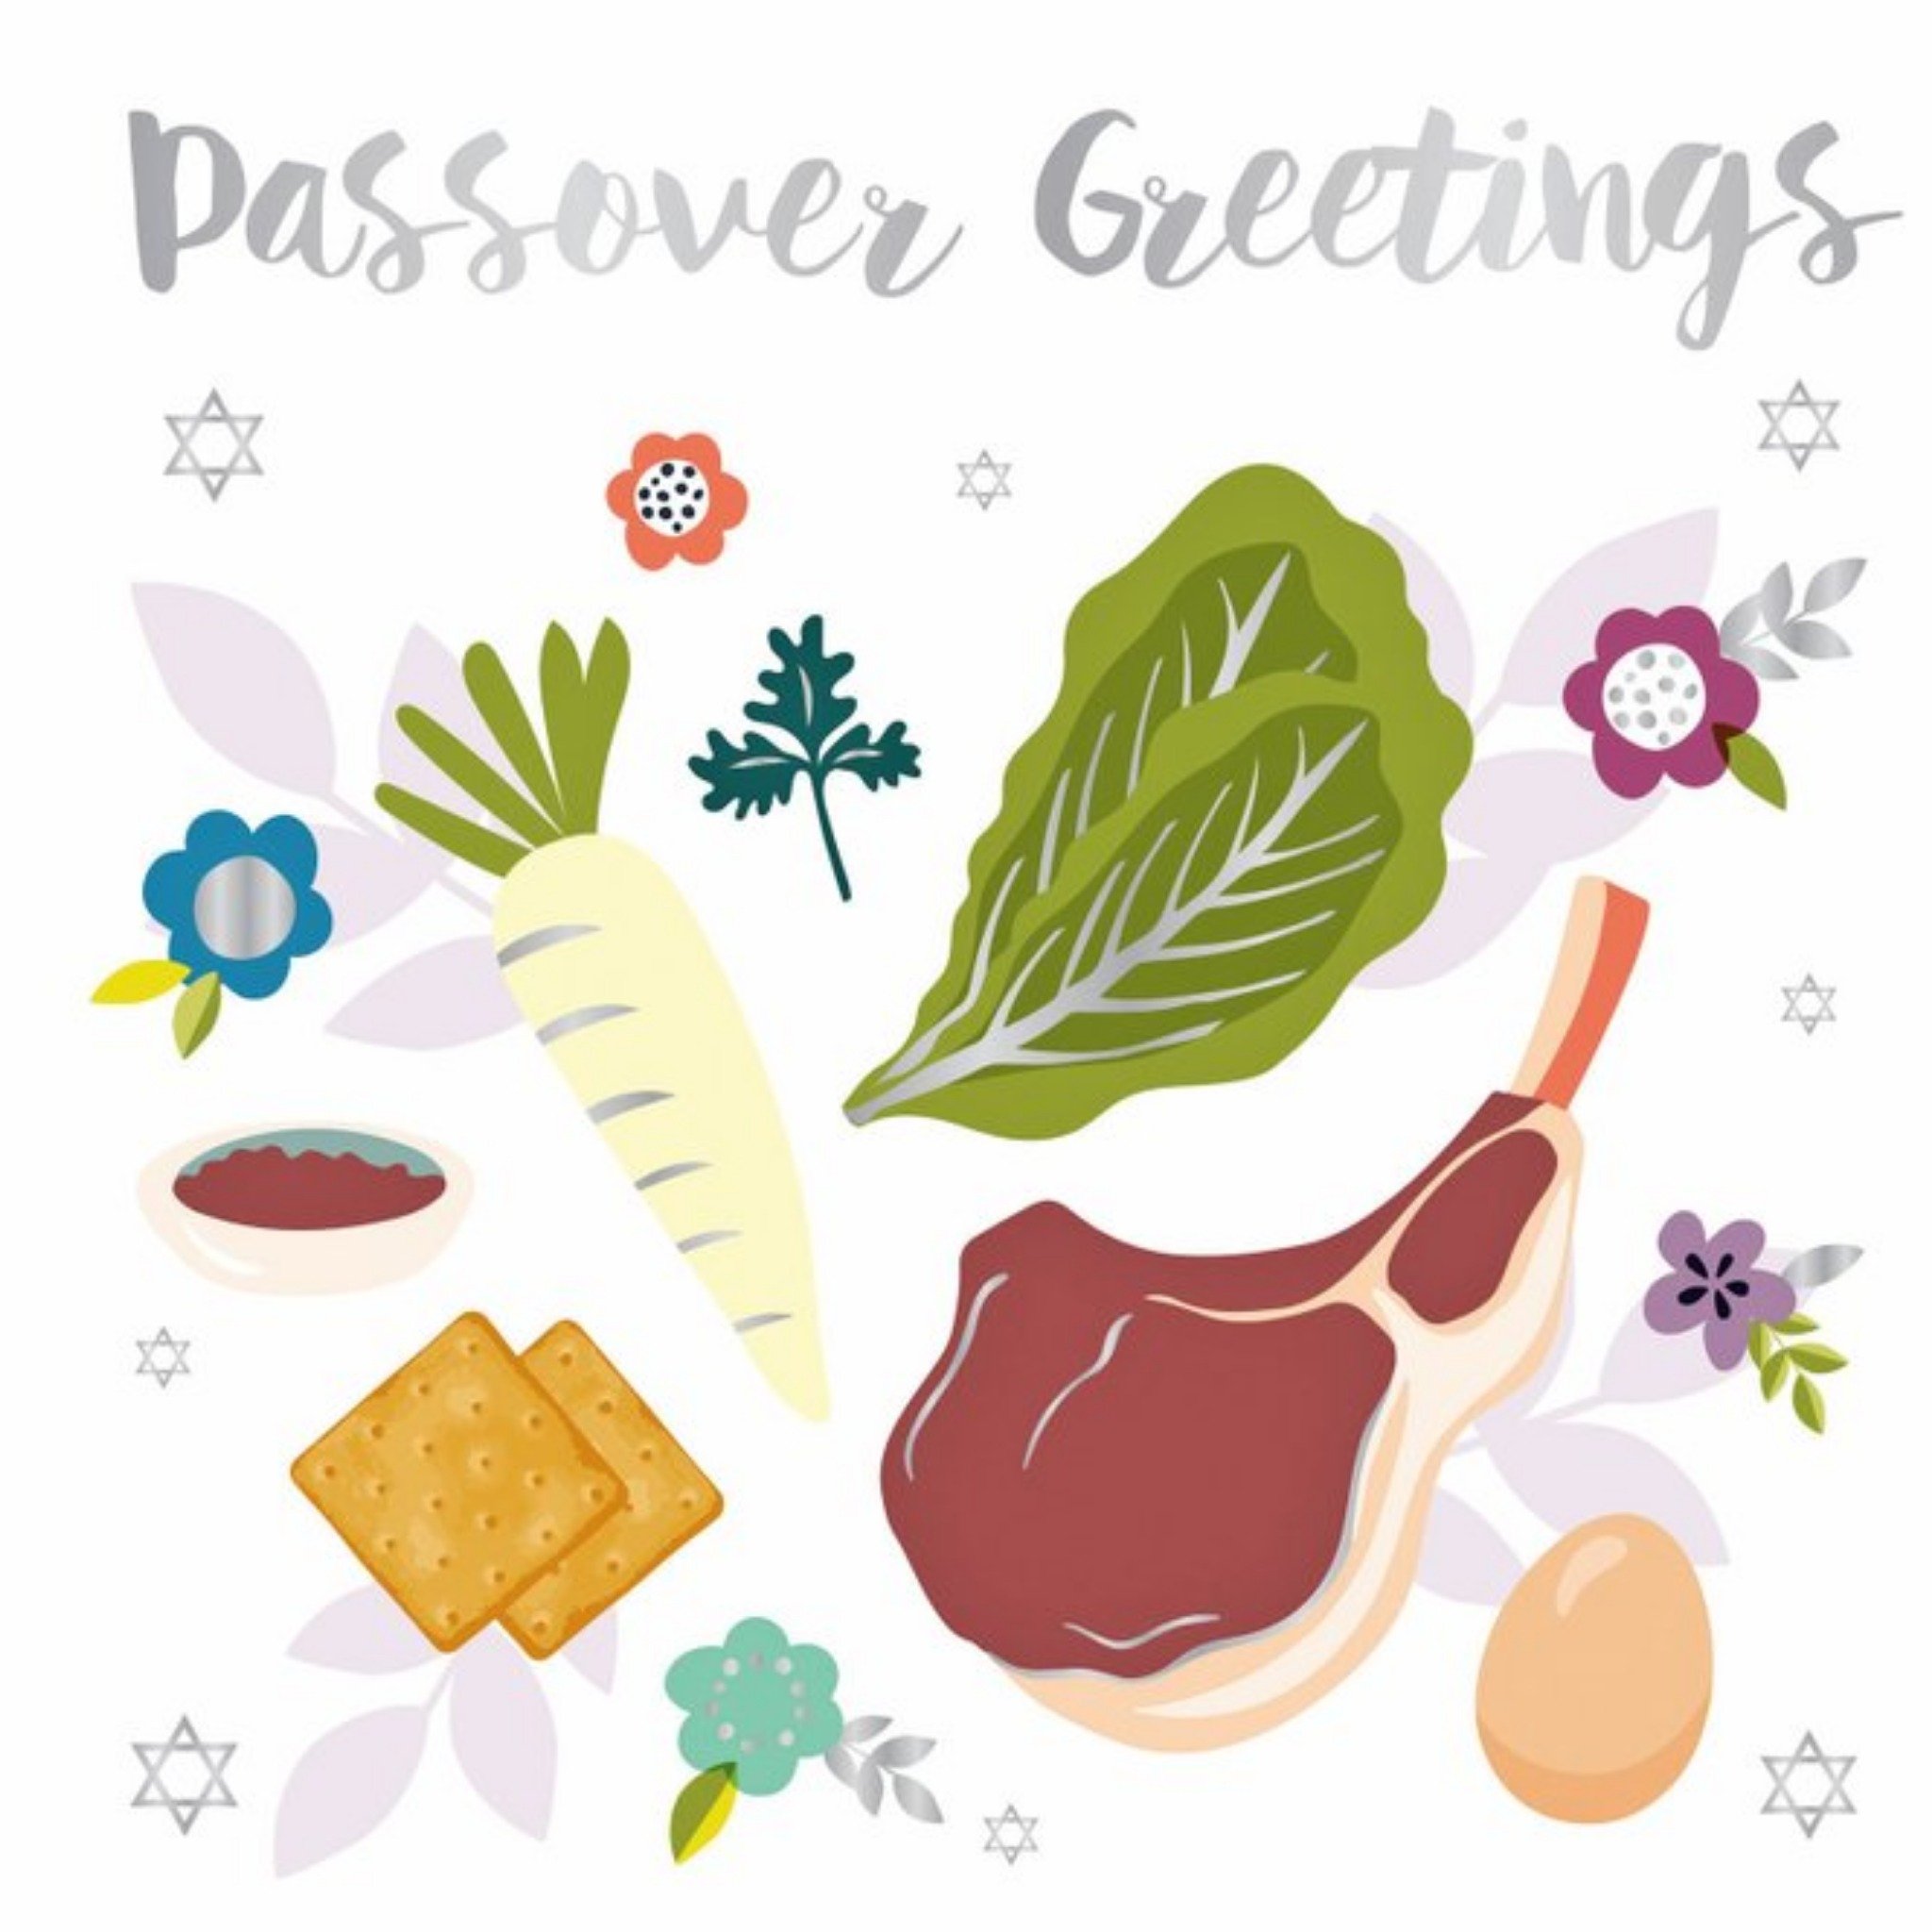 Moonpig Passover Greetings Feast Card, Square